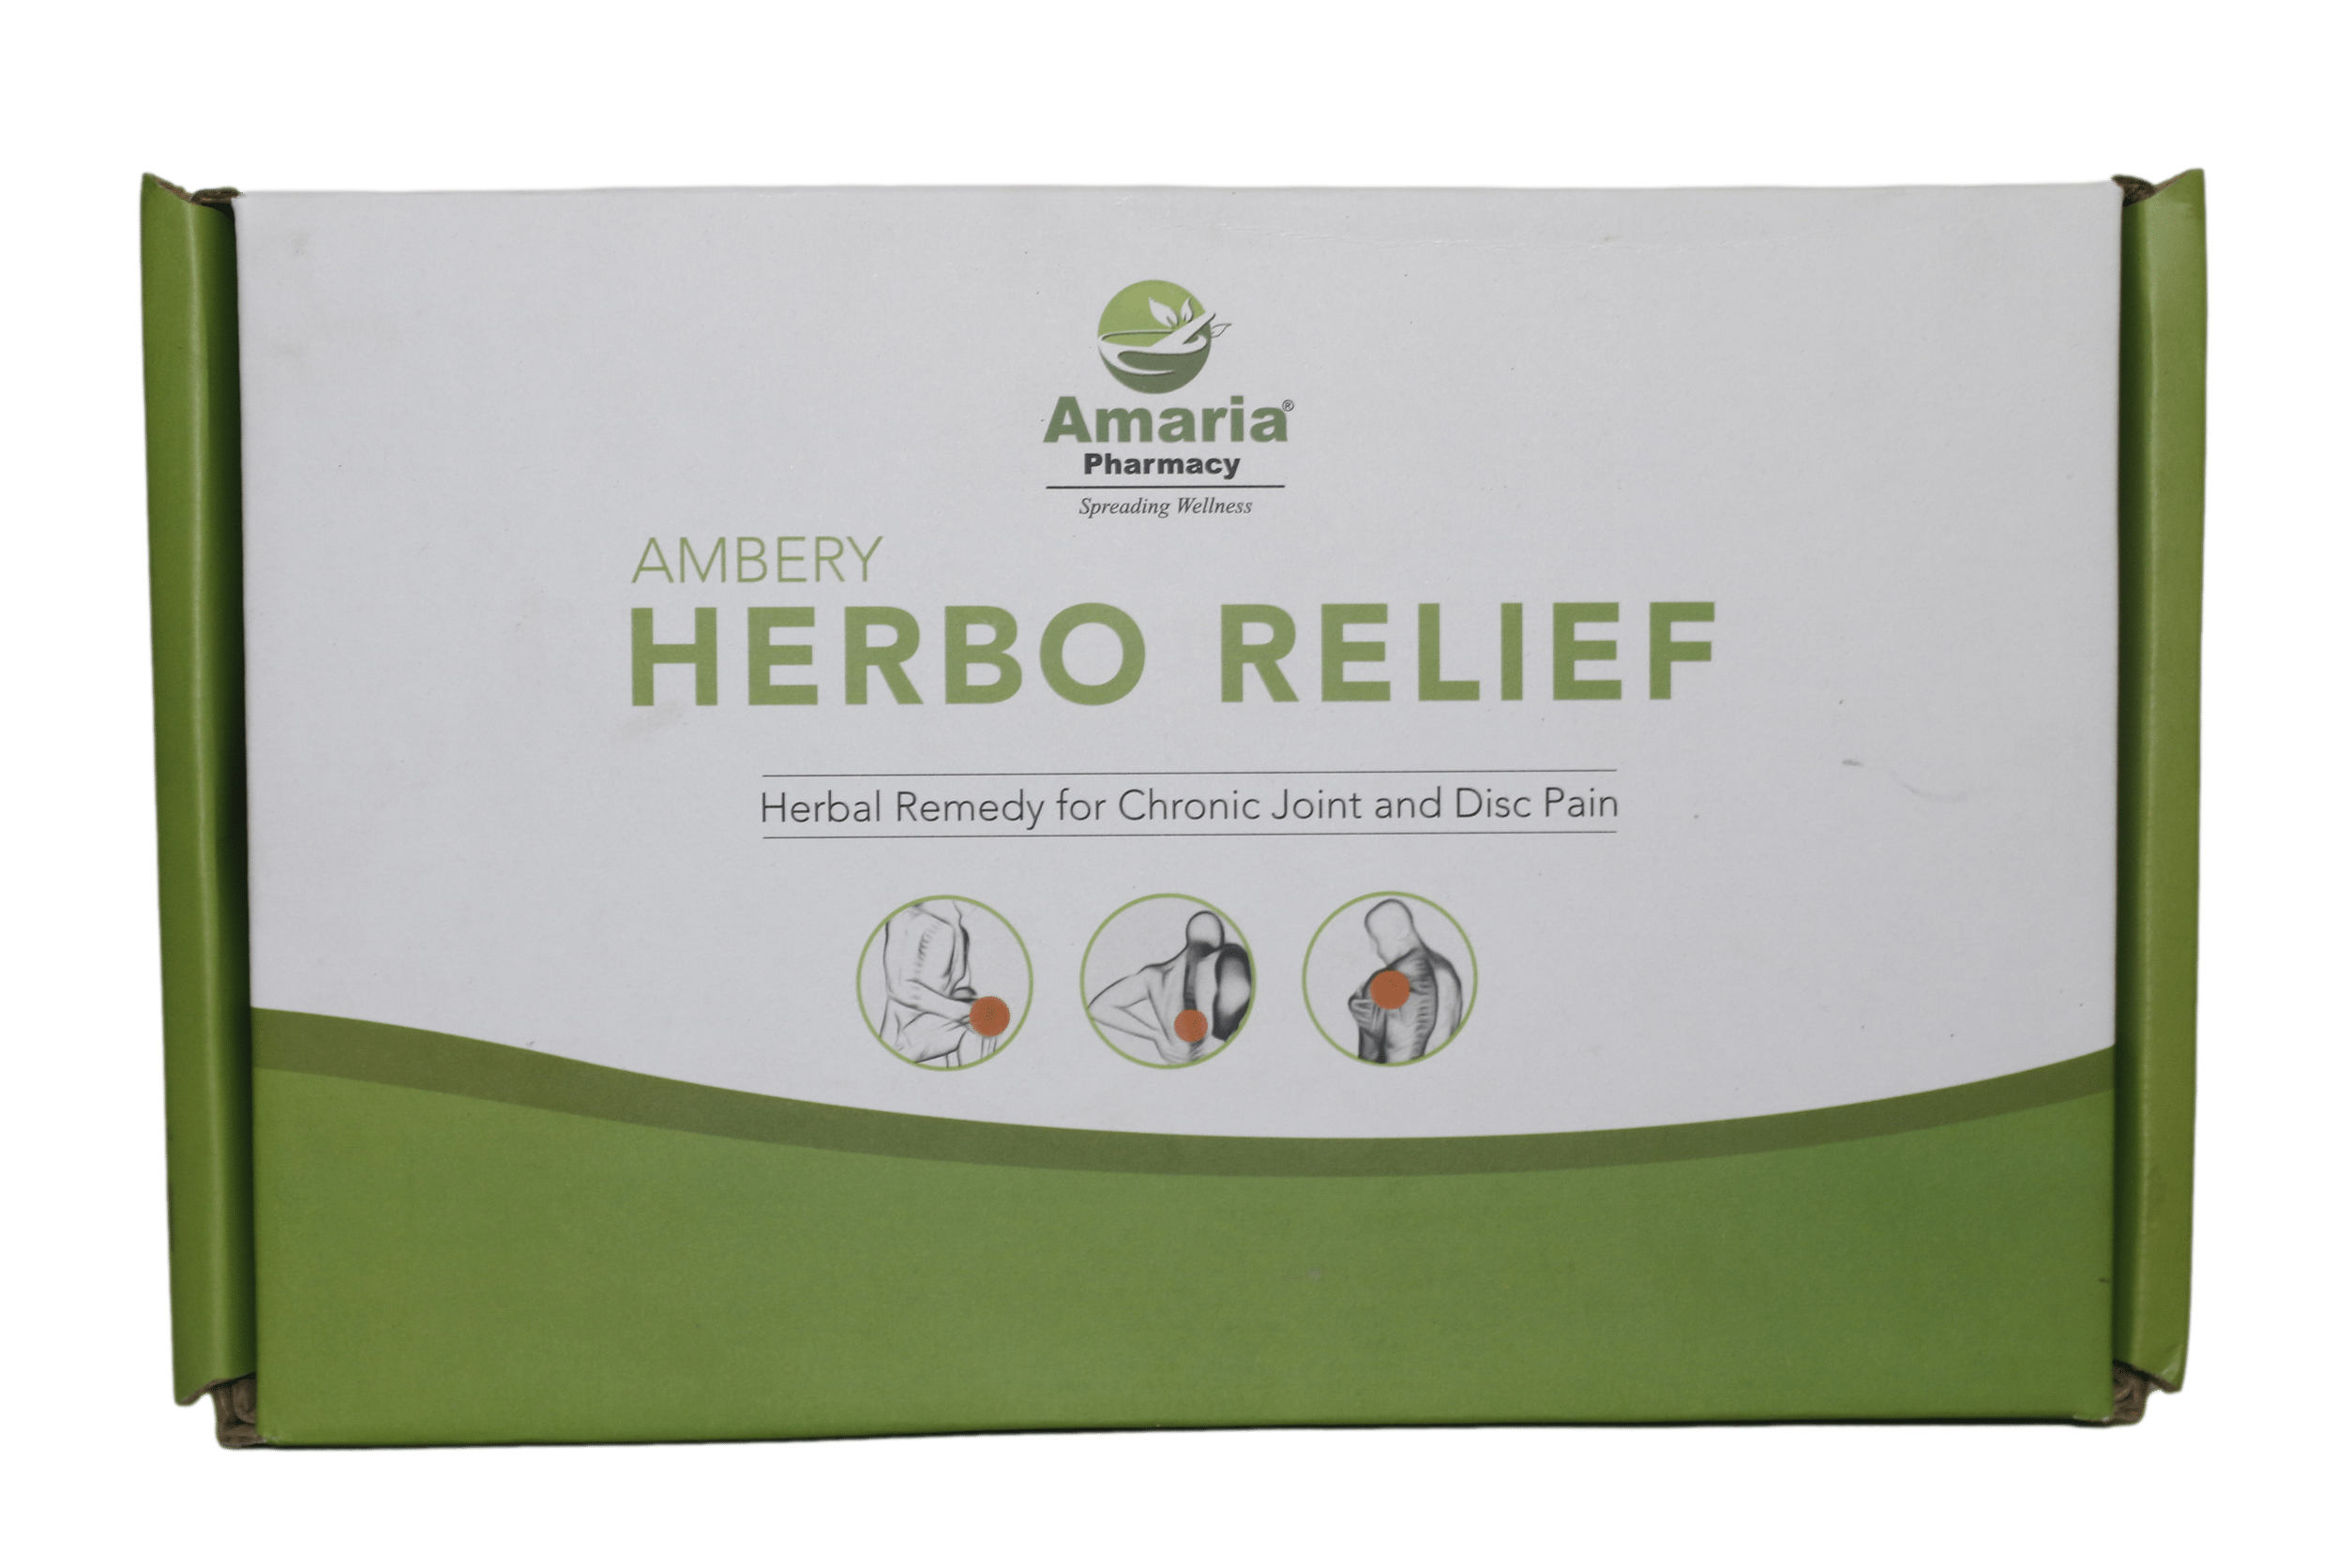 Ambery Herbo relief